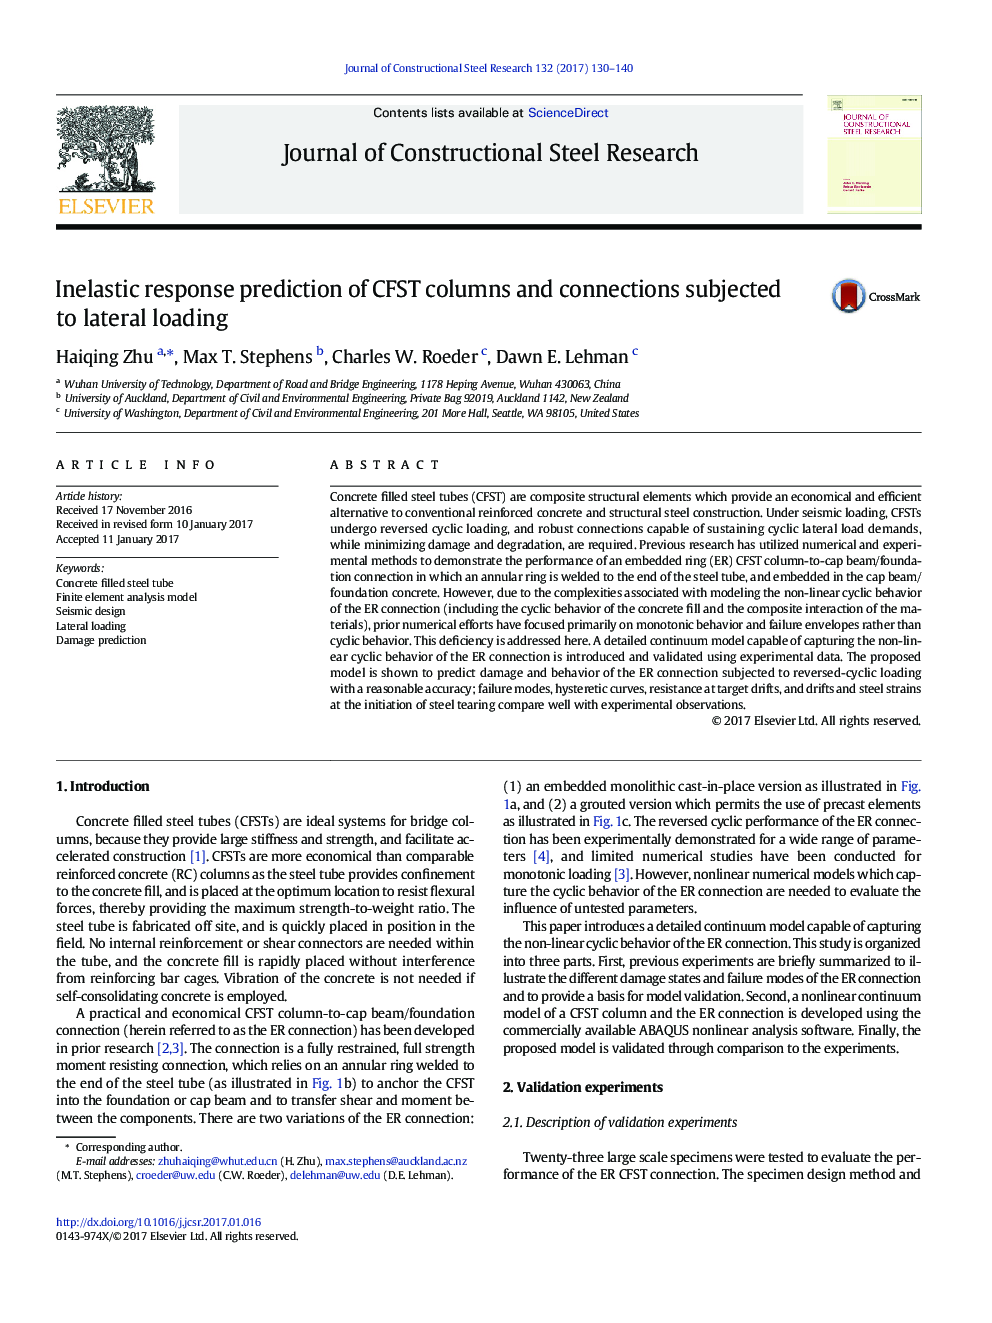 Inelastic response prediction of CFST columns and connections subjected to lateral loading